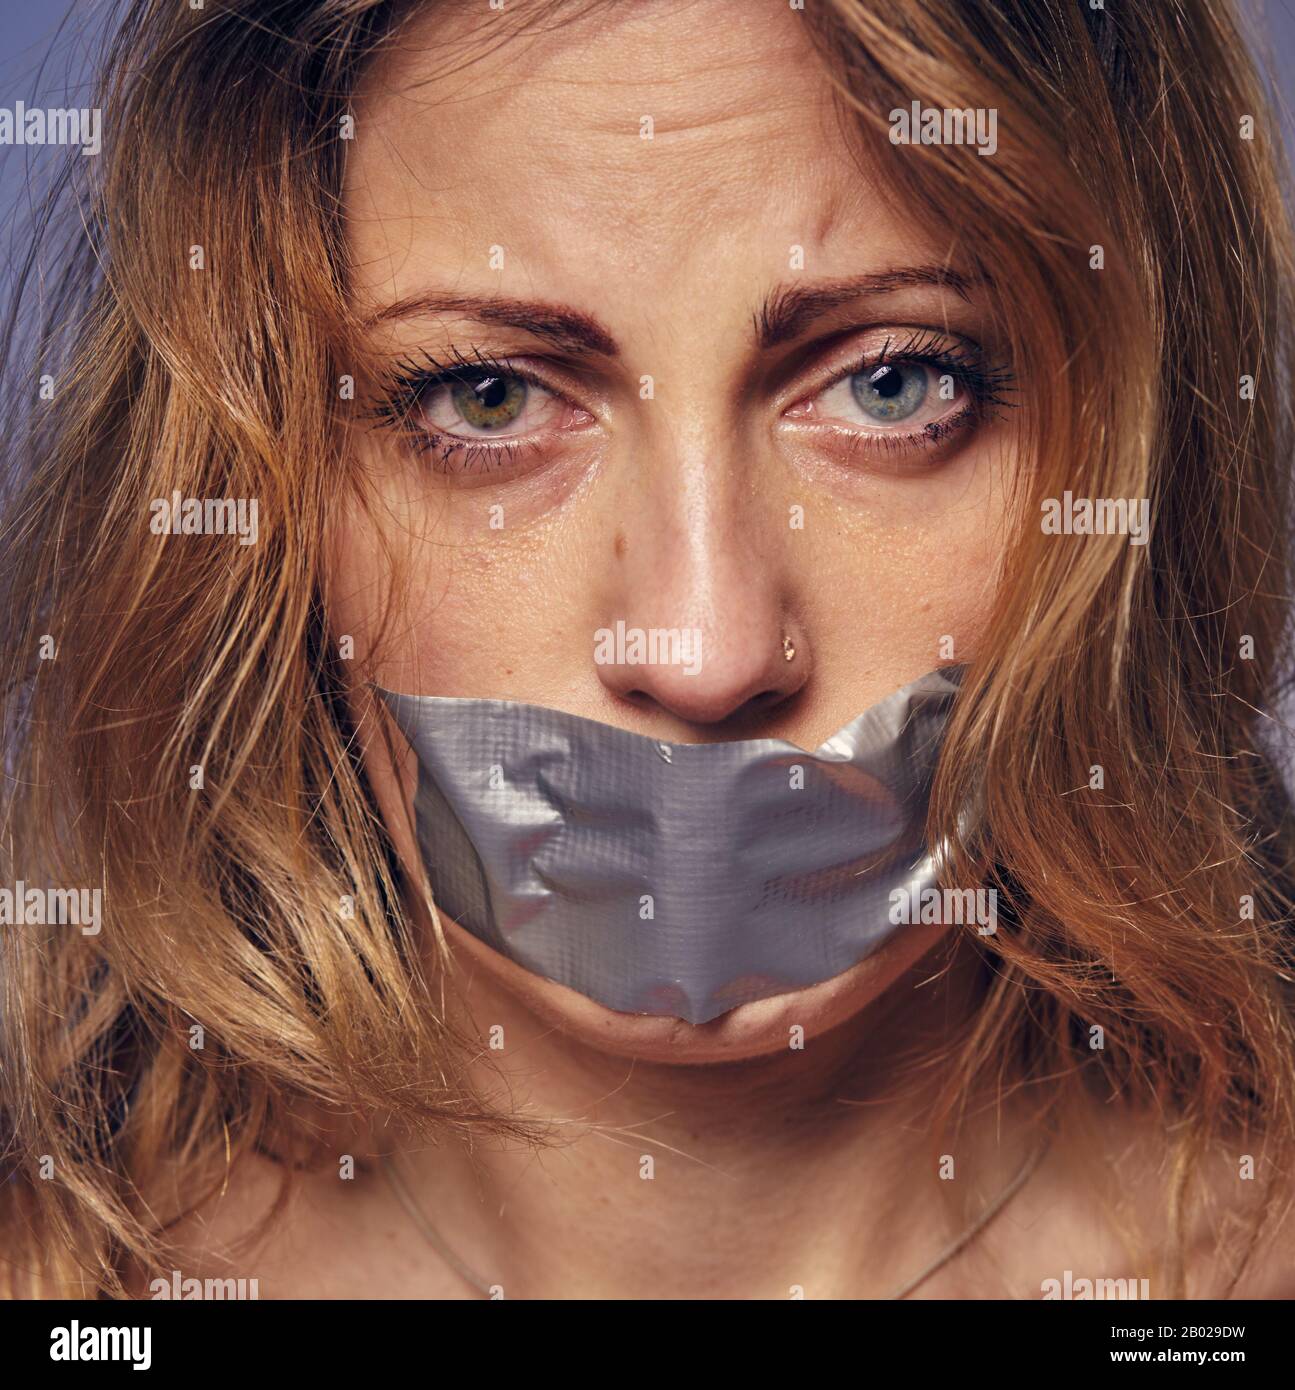 woman and violence. photo of a woman with her lips stuck together. Stock Photo